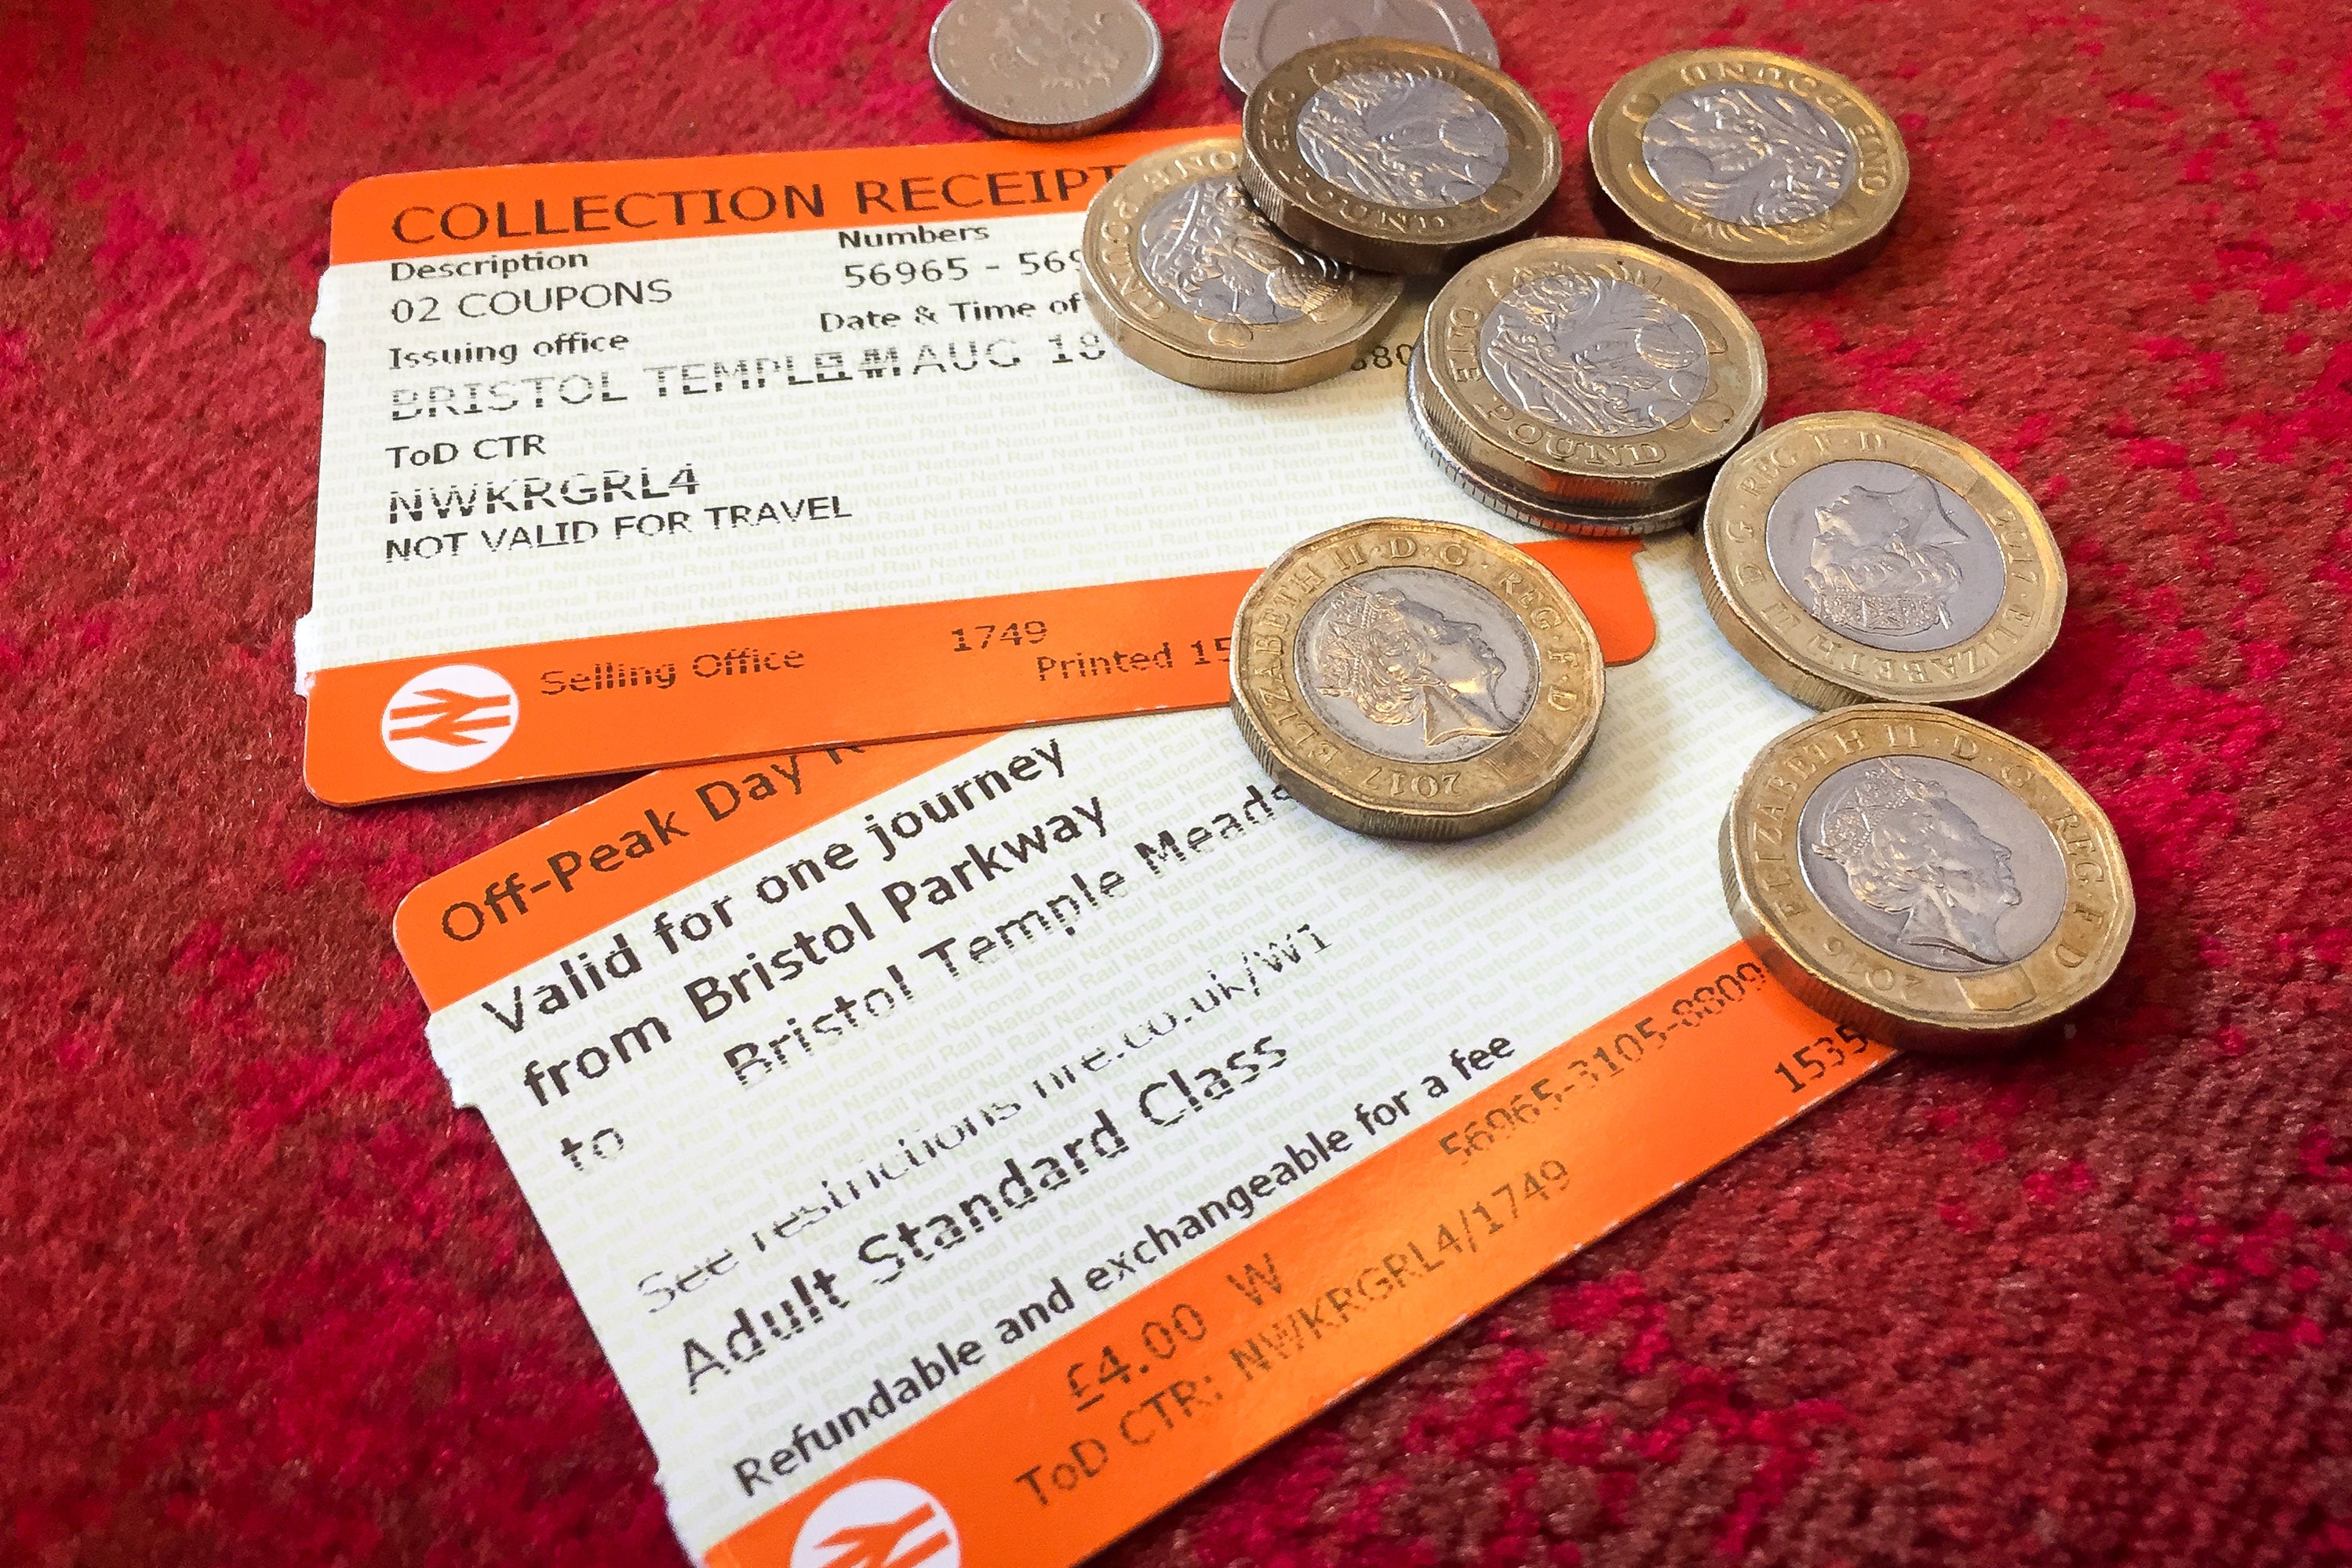 Rail passengers will get an indication on Wednesday of how much ticket prices may rise, amid calls for fares to be frozen (Ben Birchall/PA)